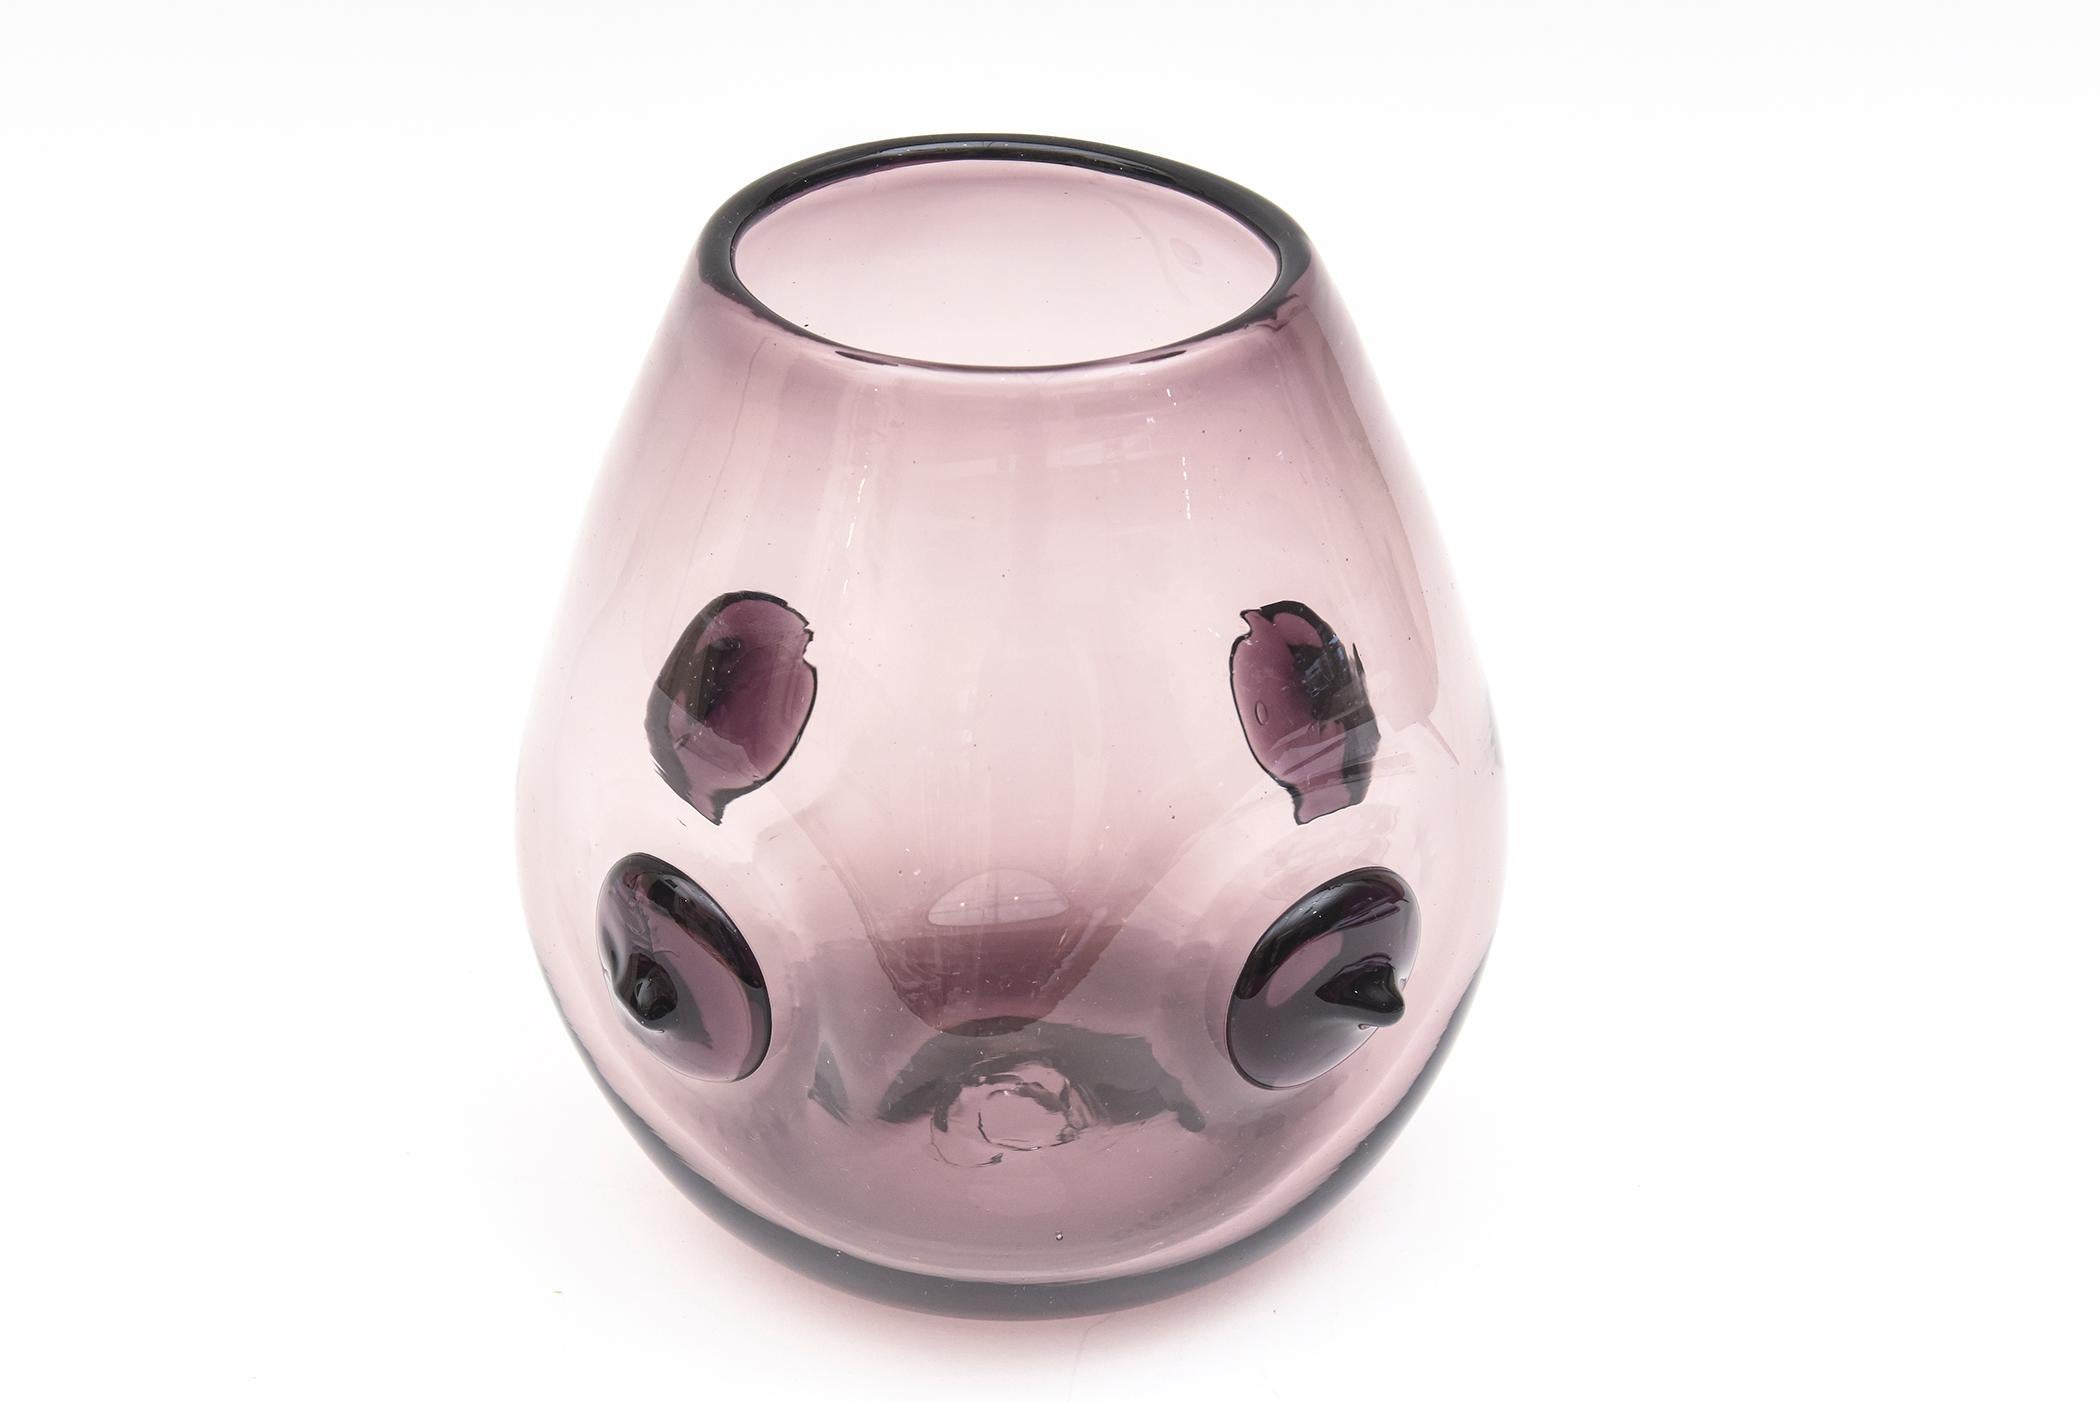 Blown Glass Wayne Husted for Blenko Vintage Rare Purple Glass Vase with Nipple Protrusions For Sale